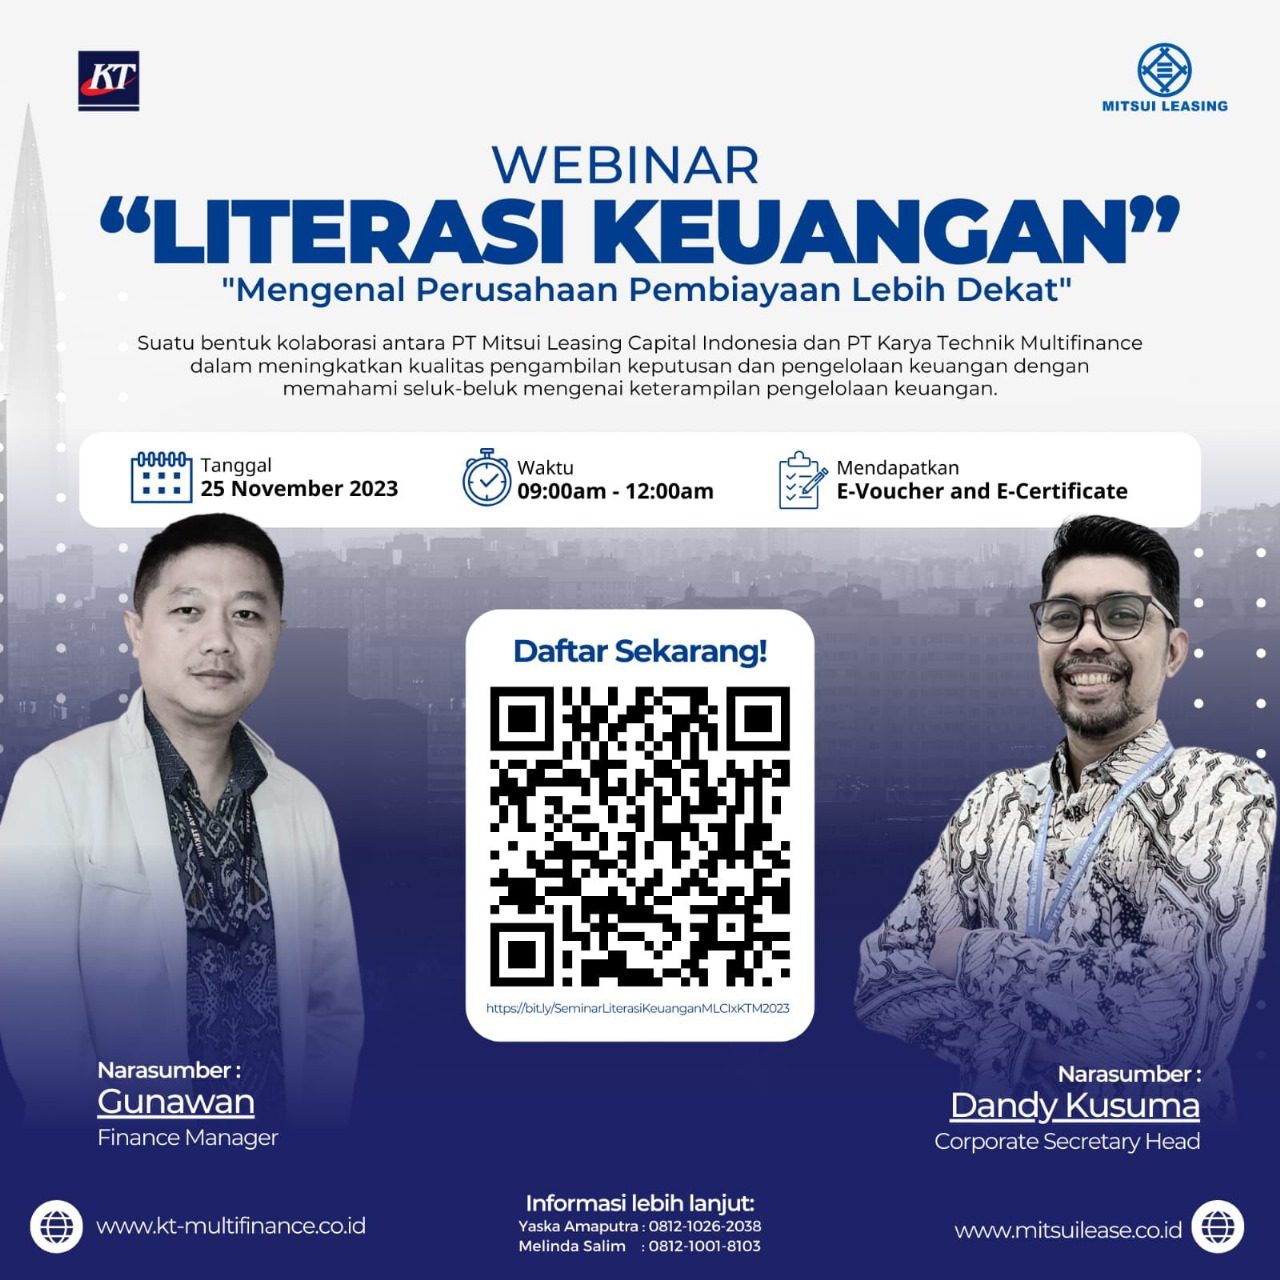 PT Karya Technik Multifinance's Financial Literacy Webinar collaborated with PT Mitsui Leasing Capital Indonesia with the theme "Getting to Know Financing Companies Closer".